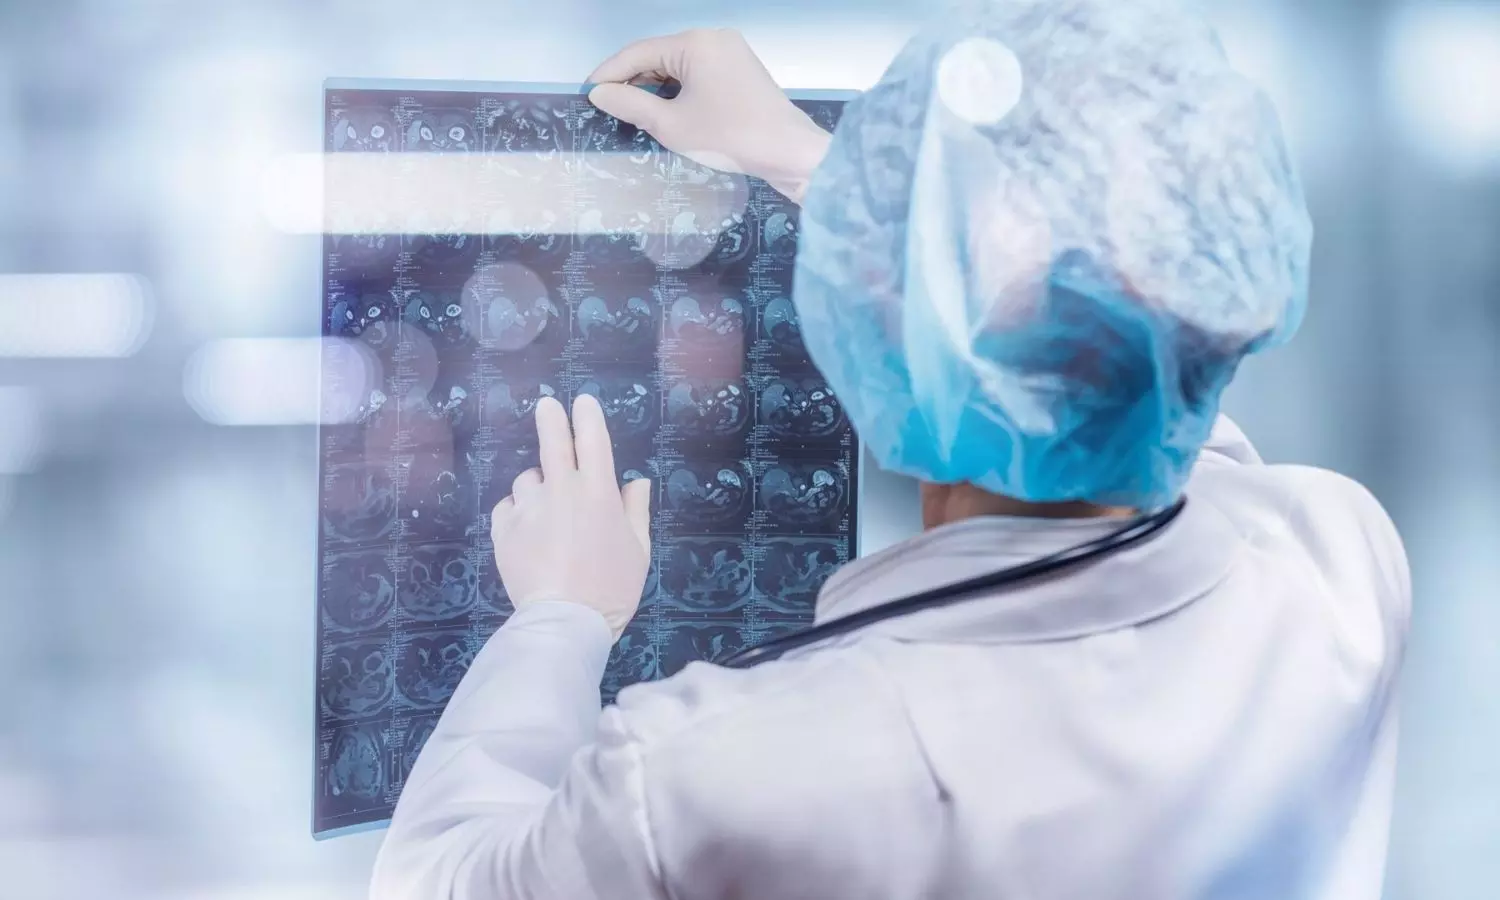 Both AI and radiologists can get fooled by tampered medical images, study finds